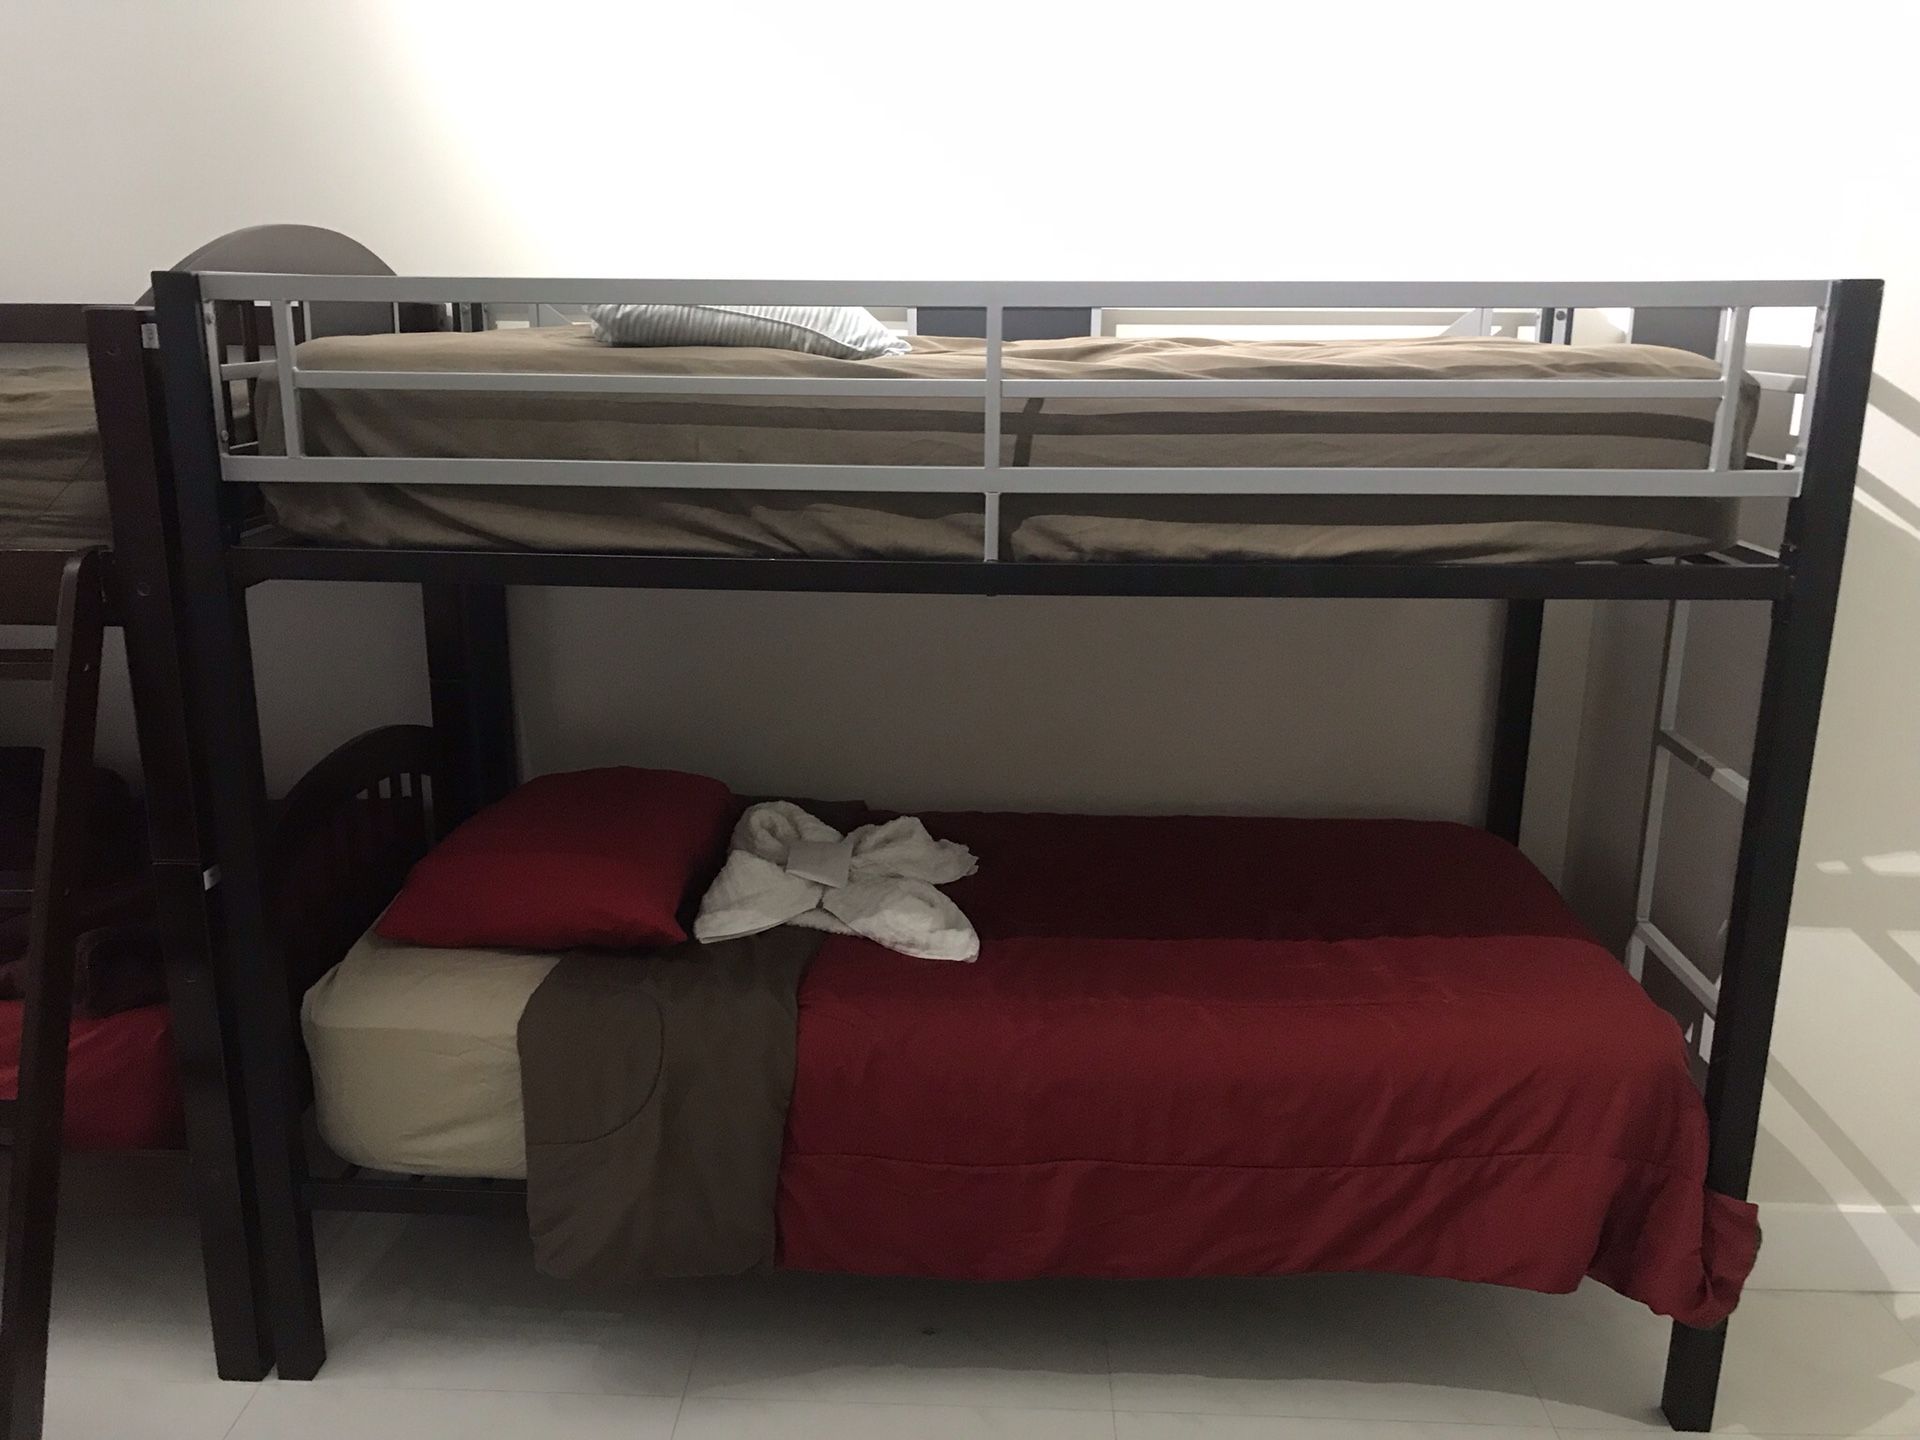 bunk bed. Mattress included.